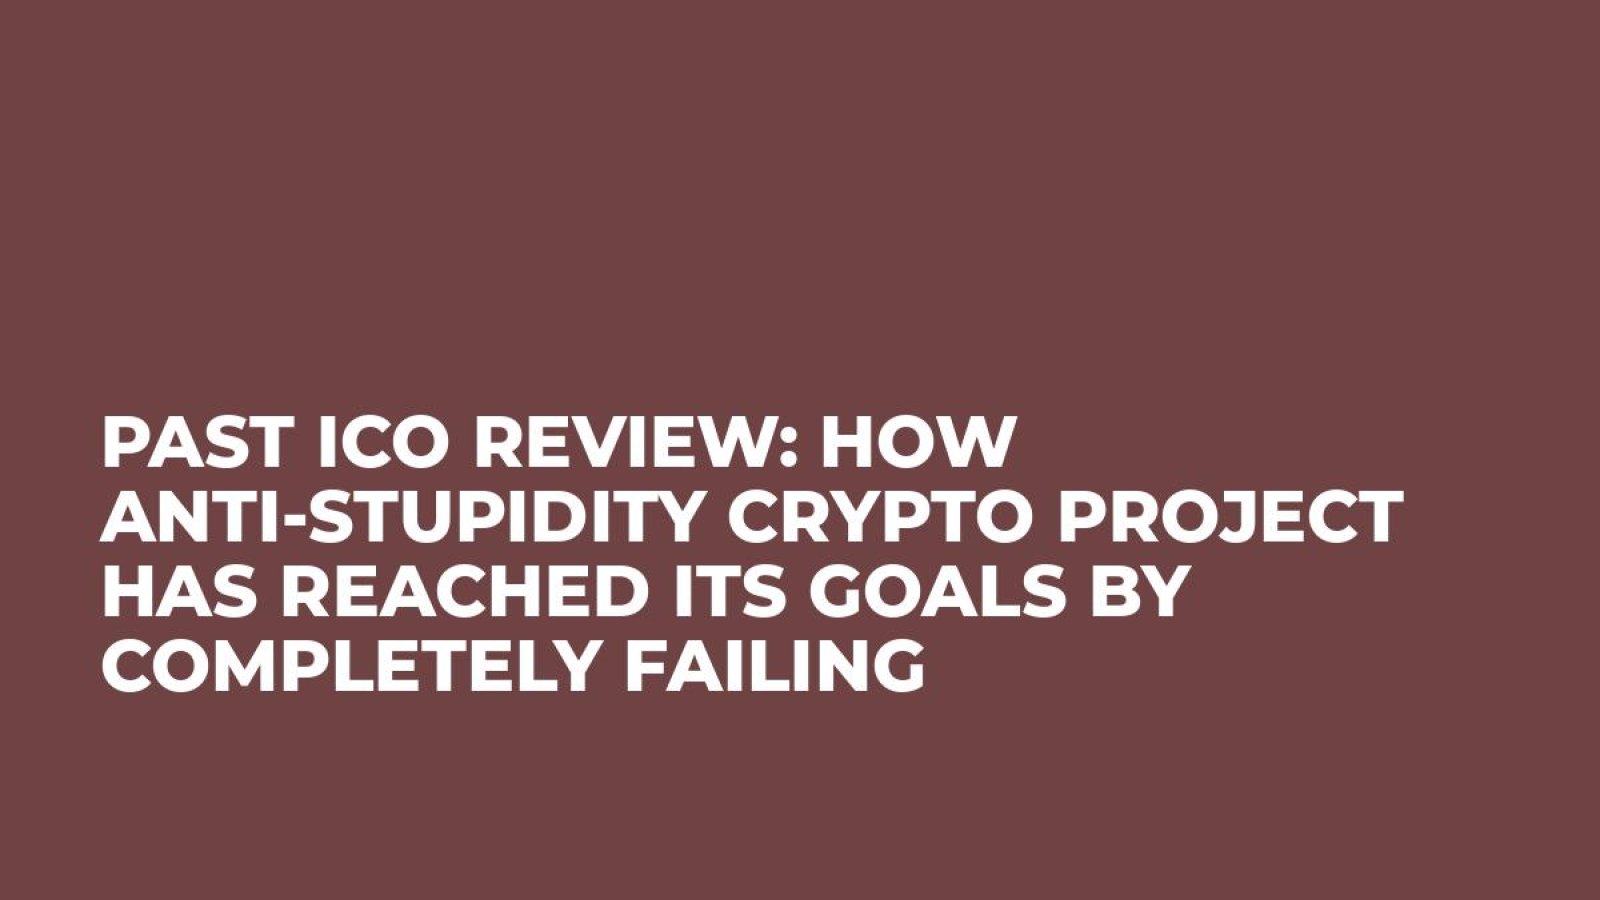 Past ICO Review: How Anti-Stupidity Crypto Project Has Reached its Goals by Completely Failing